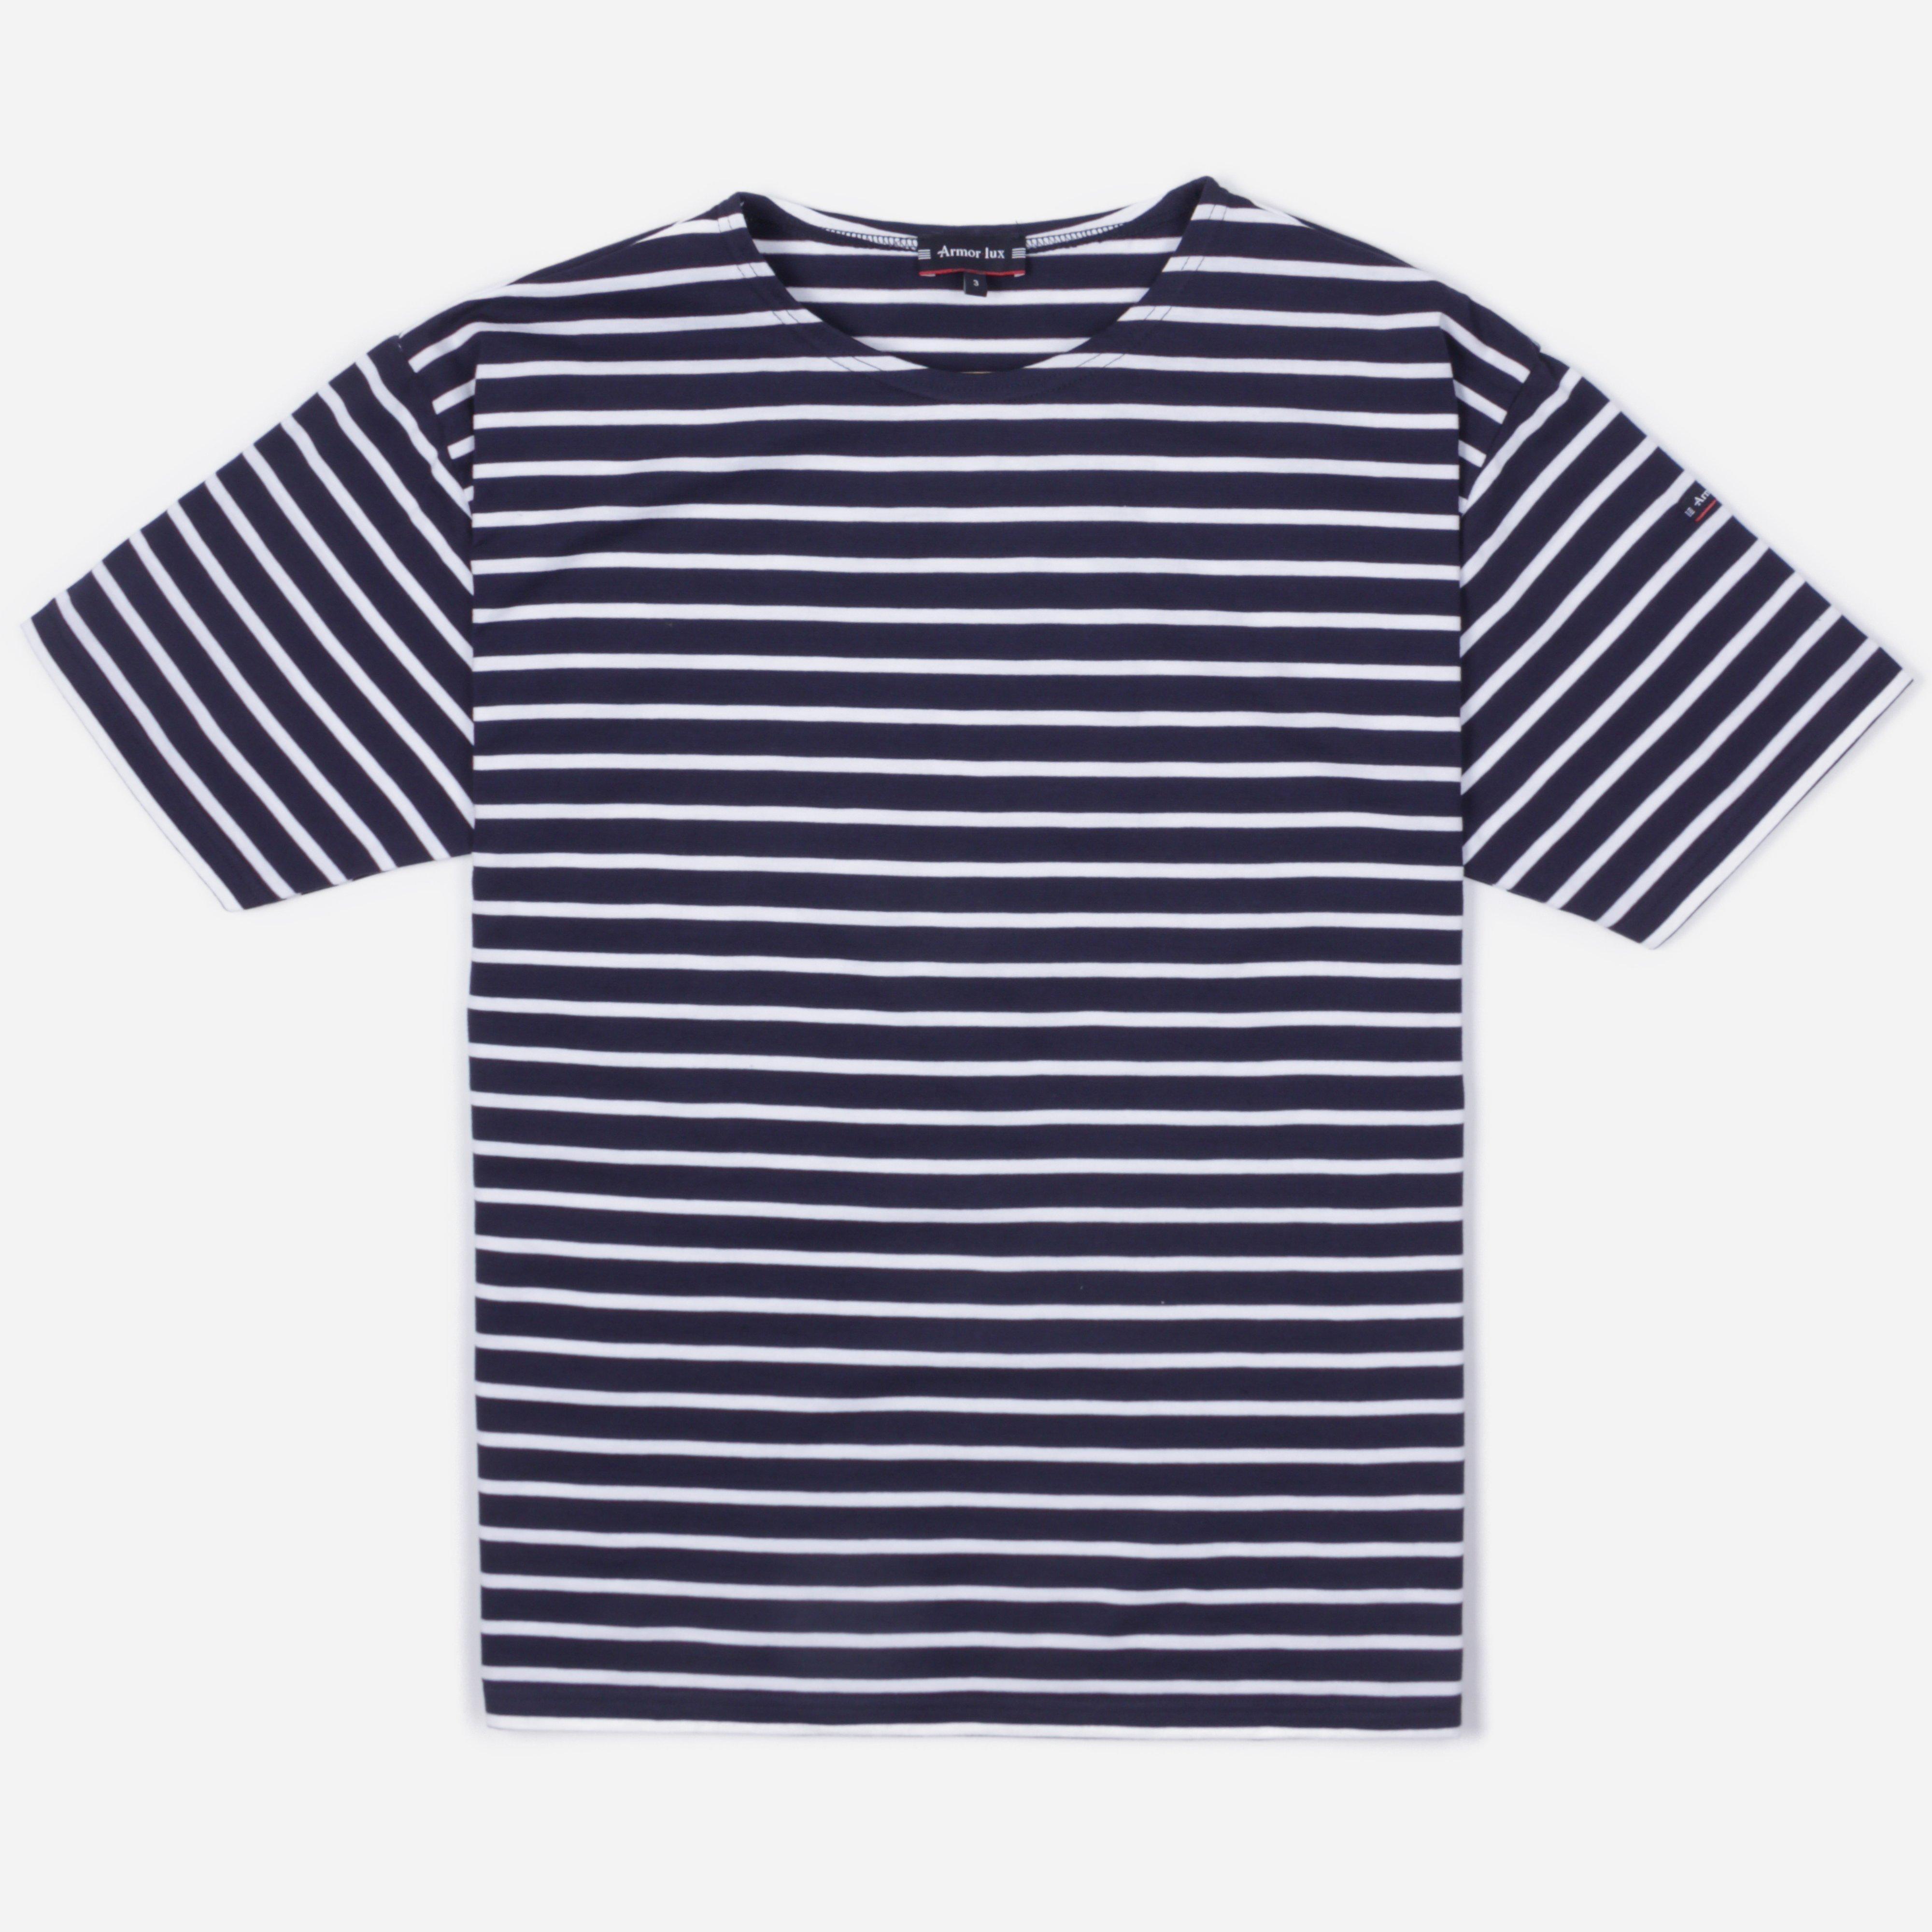 Lyst - Armor Lux Theviec Sailor T-shirt in Blue for Men